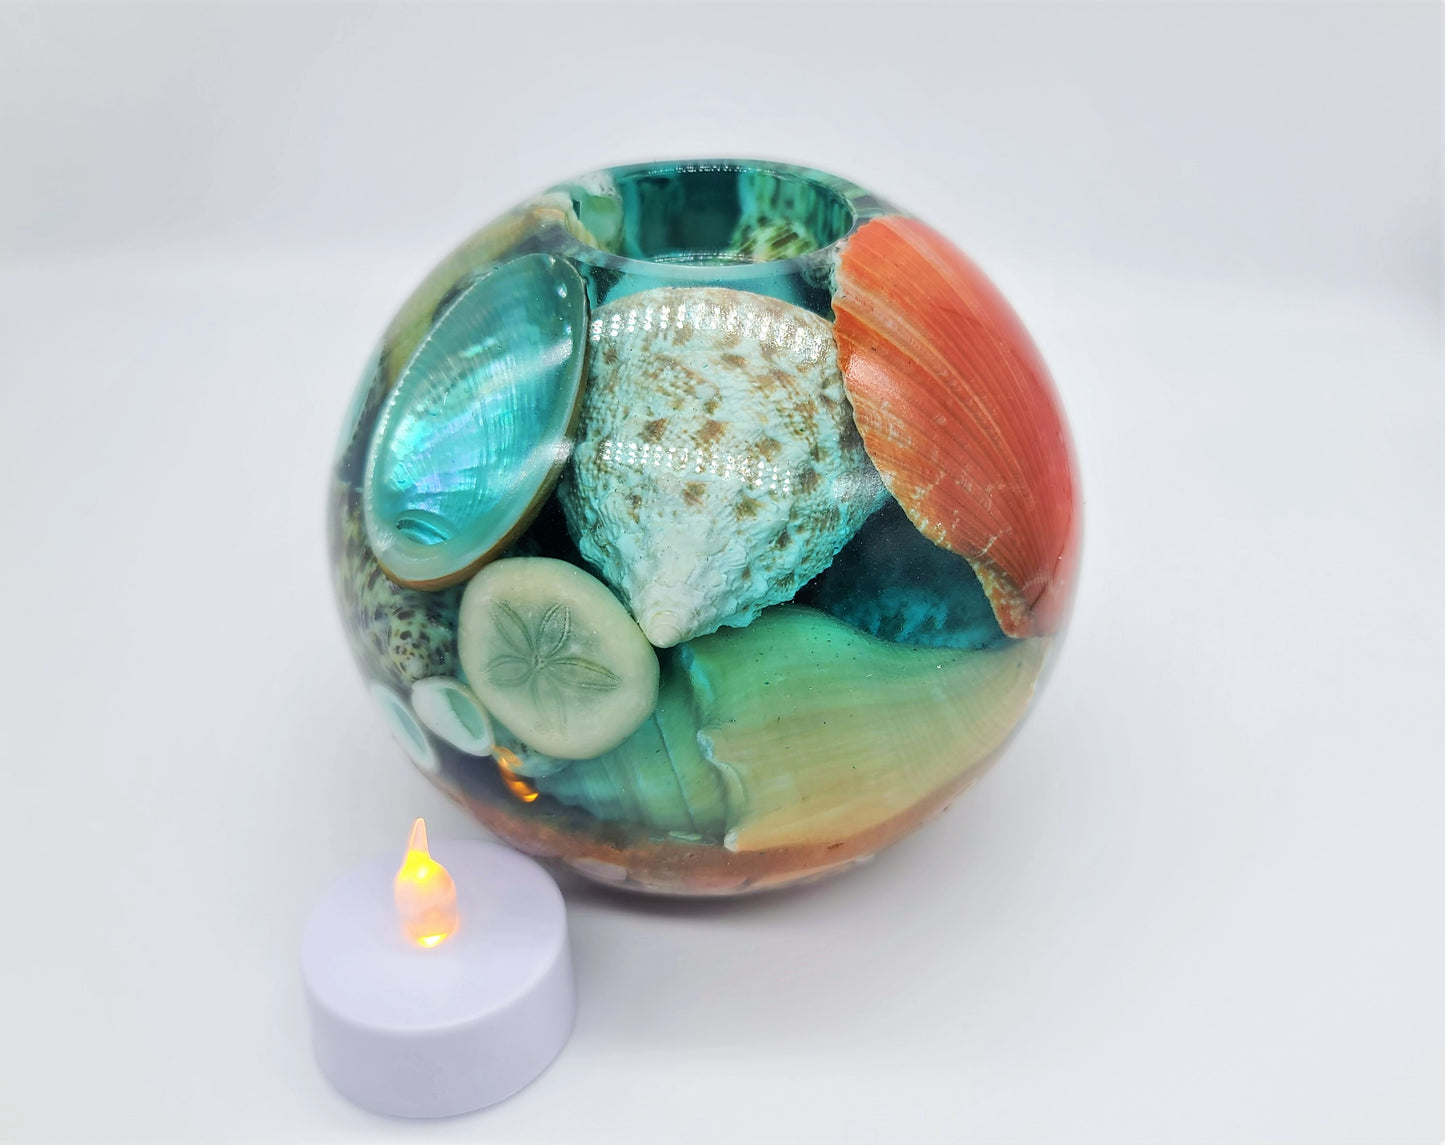 Large Spherical / Round Seascape Candle Holder